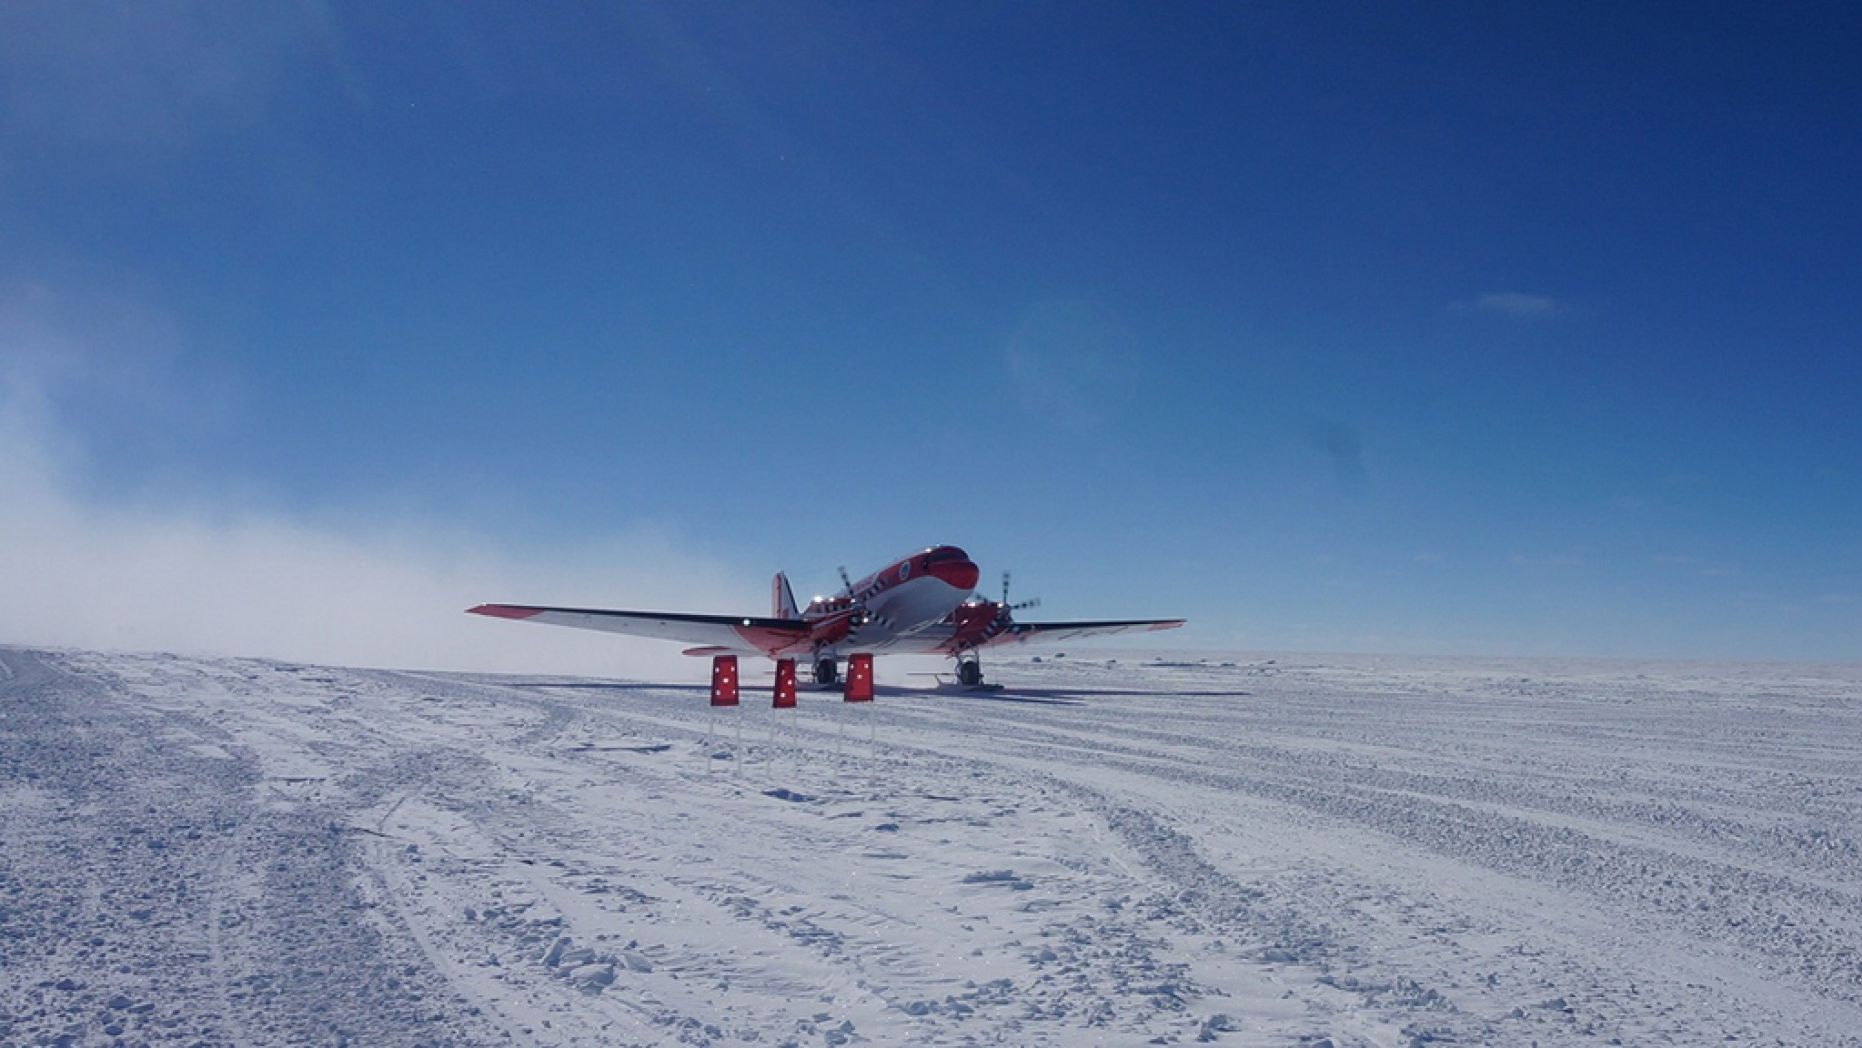 Chinas first fixed wing aircraft for polar flight Snow Eagle 601 taxies after its landing on Jan. 9 2017 at the airport of Kunlun Station in Antarctica